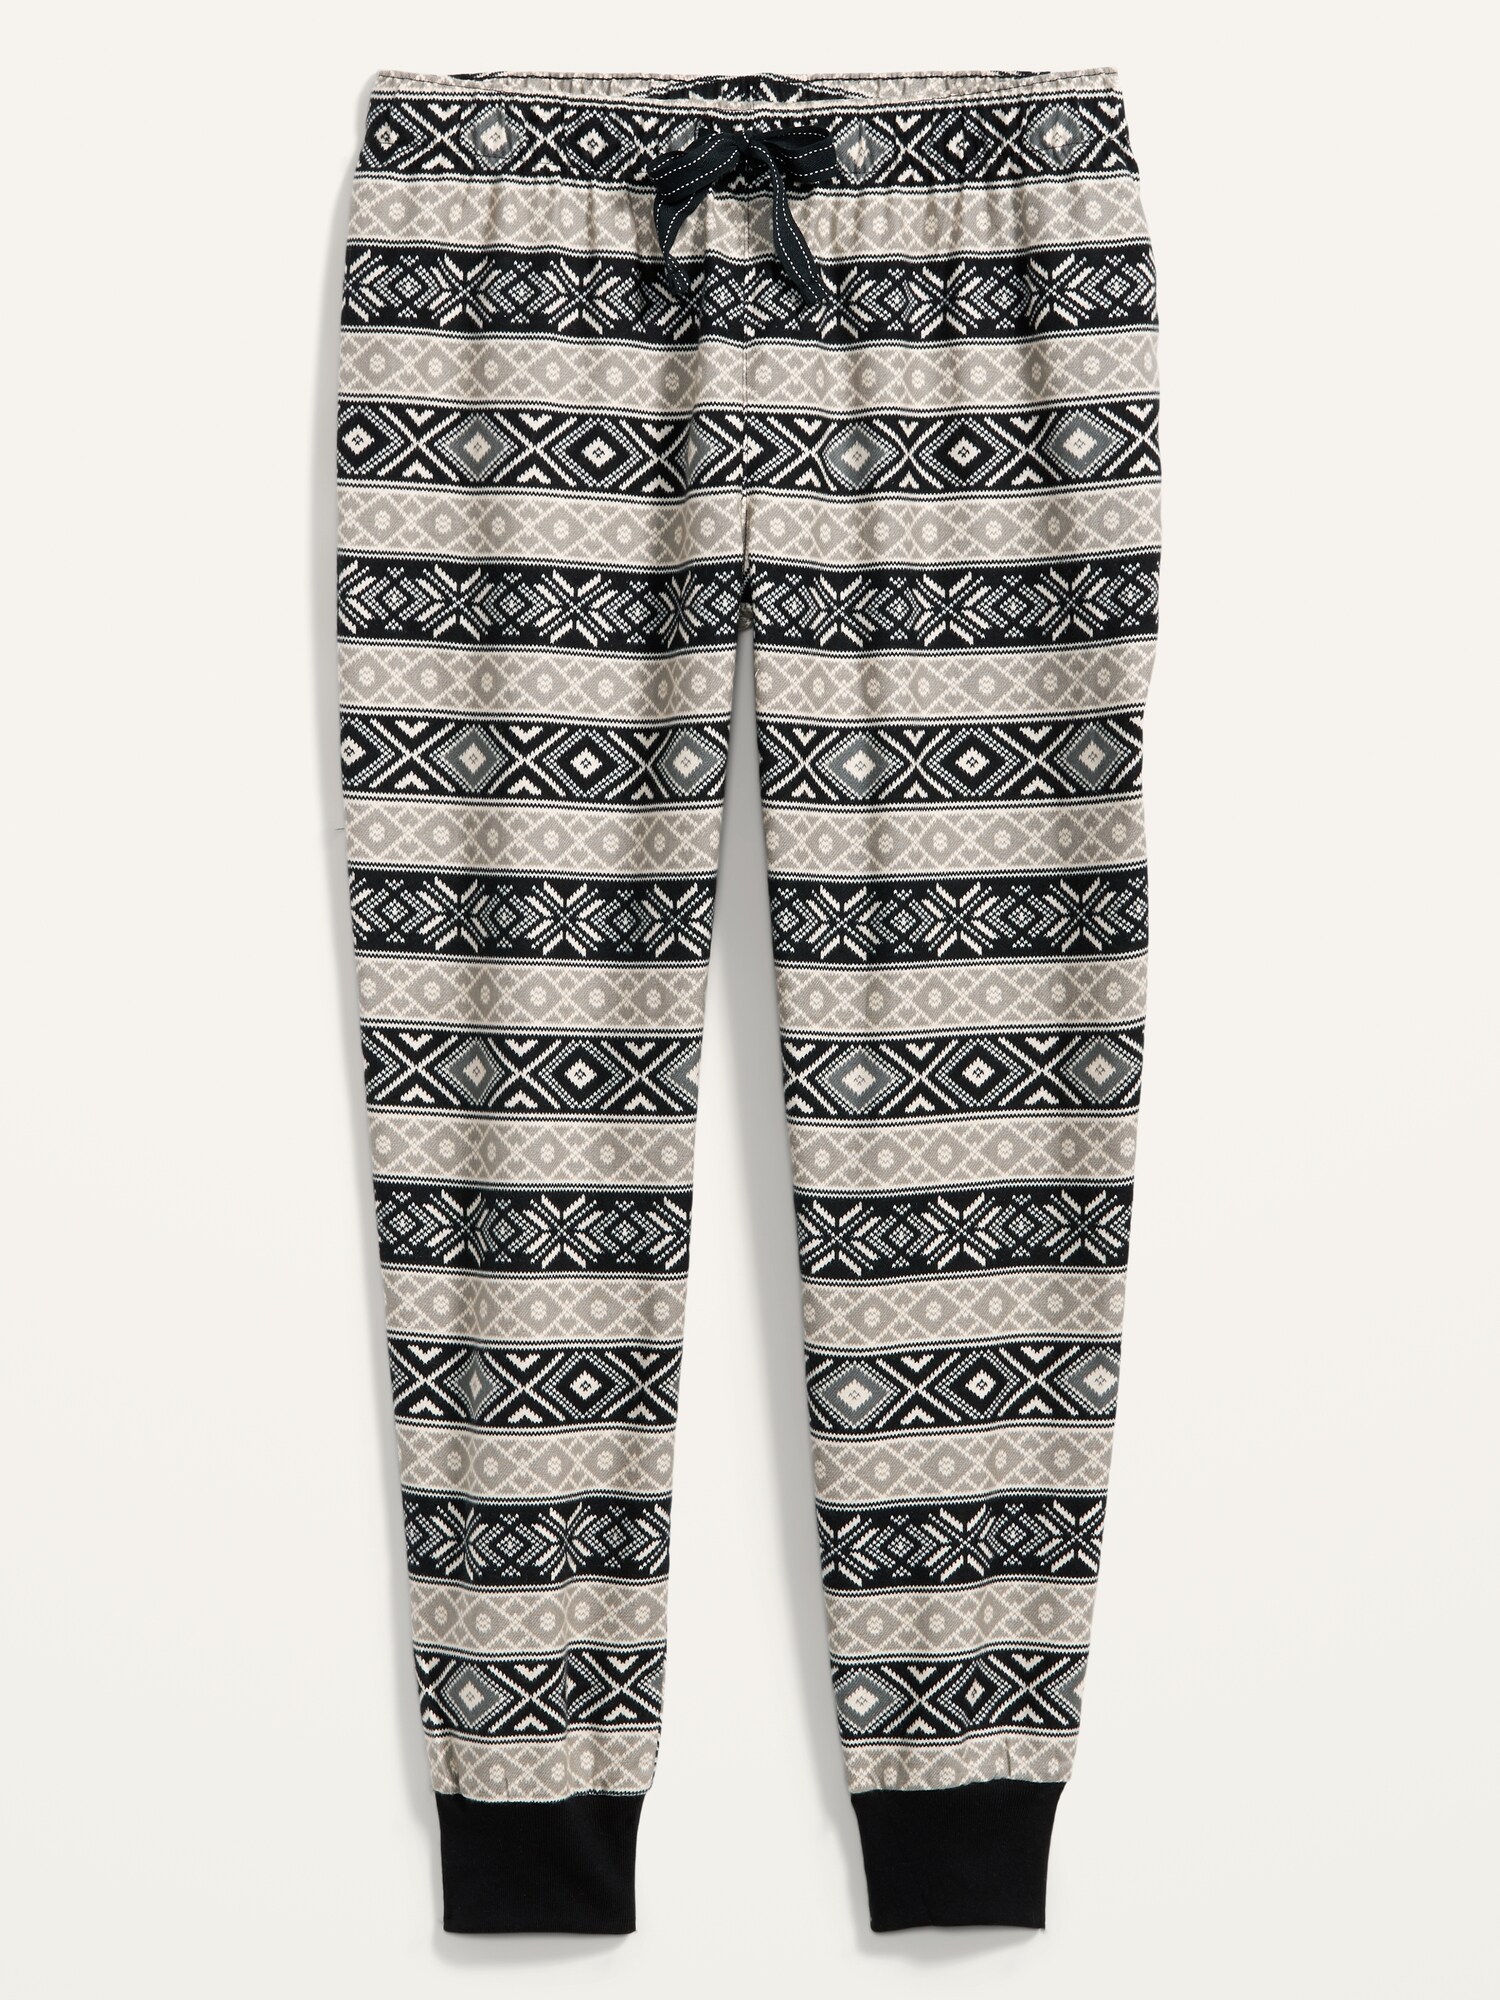 Patterned Flannel Jogger Pajama Pants for Women | Old Navy